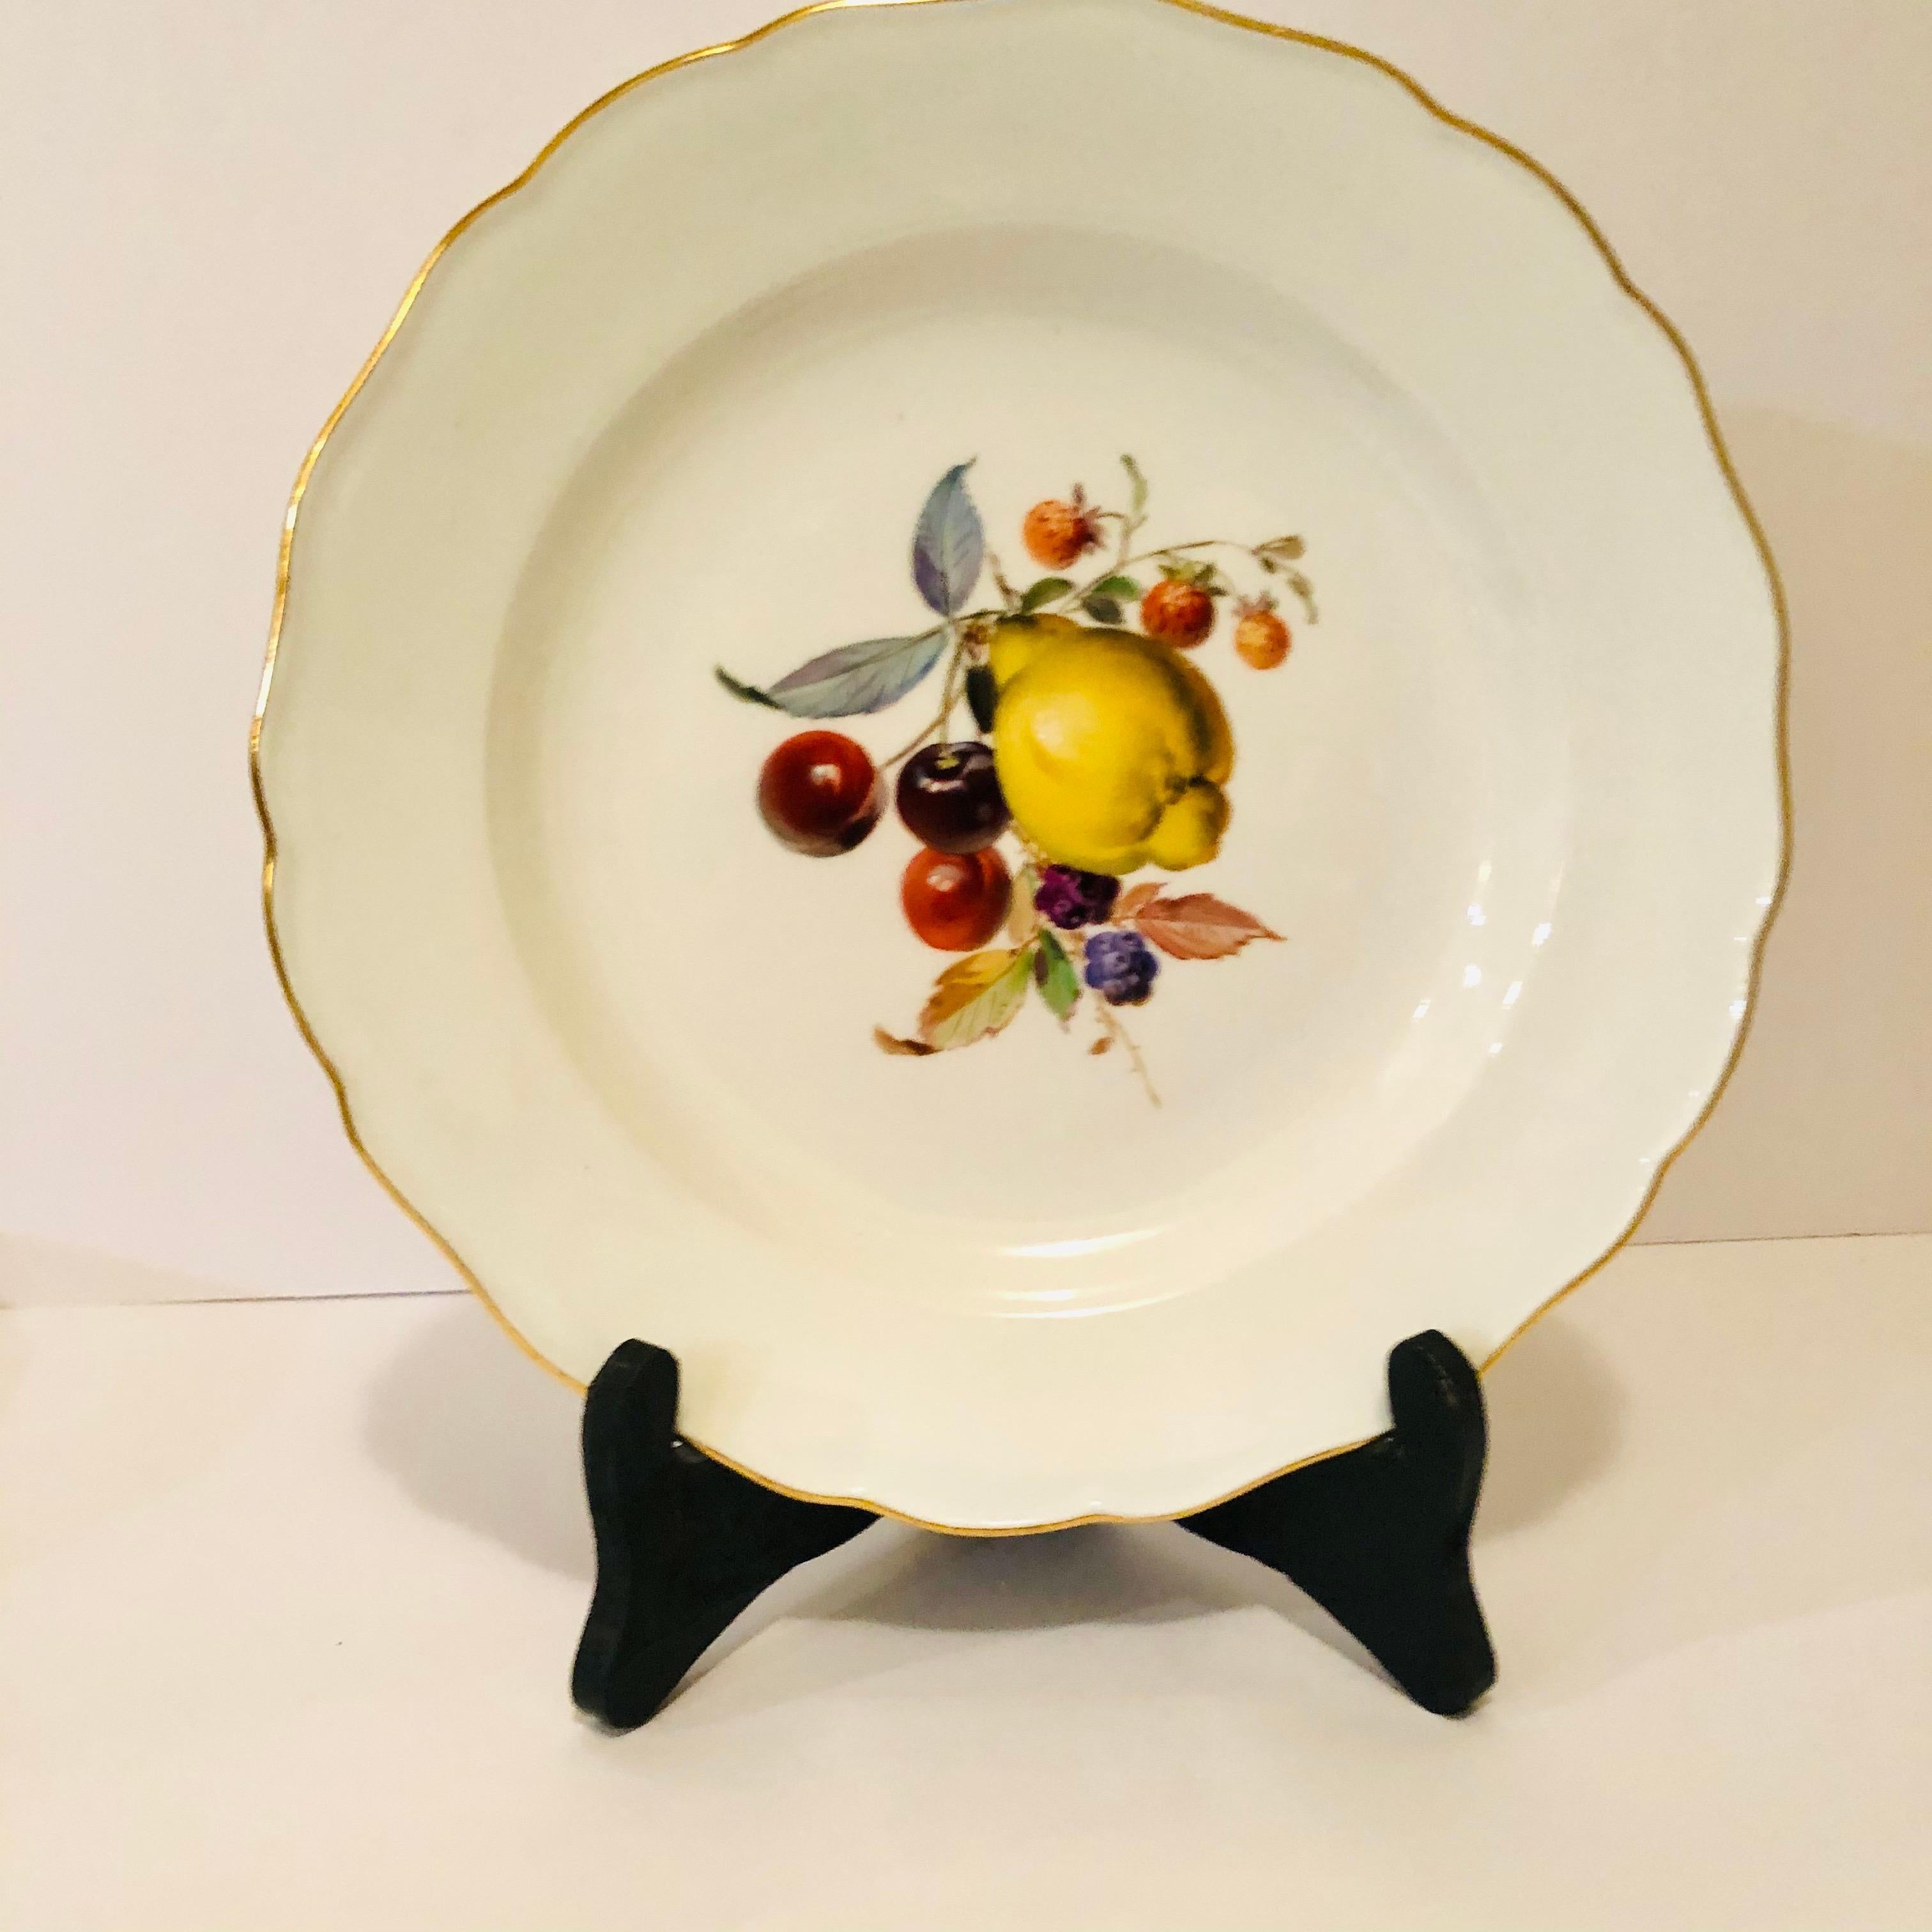 I am proud to offer you this fabulous set of Meissen dinner plates, each beautifully painted with different fruits. This is the first set of Meissen dinner plates I have seen painted with fruits. It is rare to find Meissen fruit plates like these,